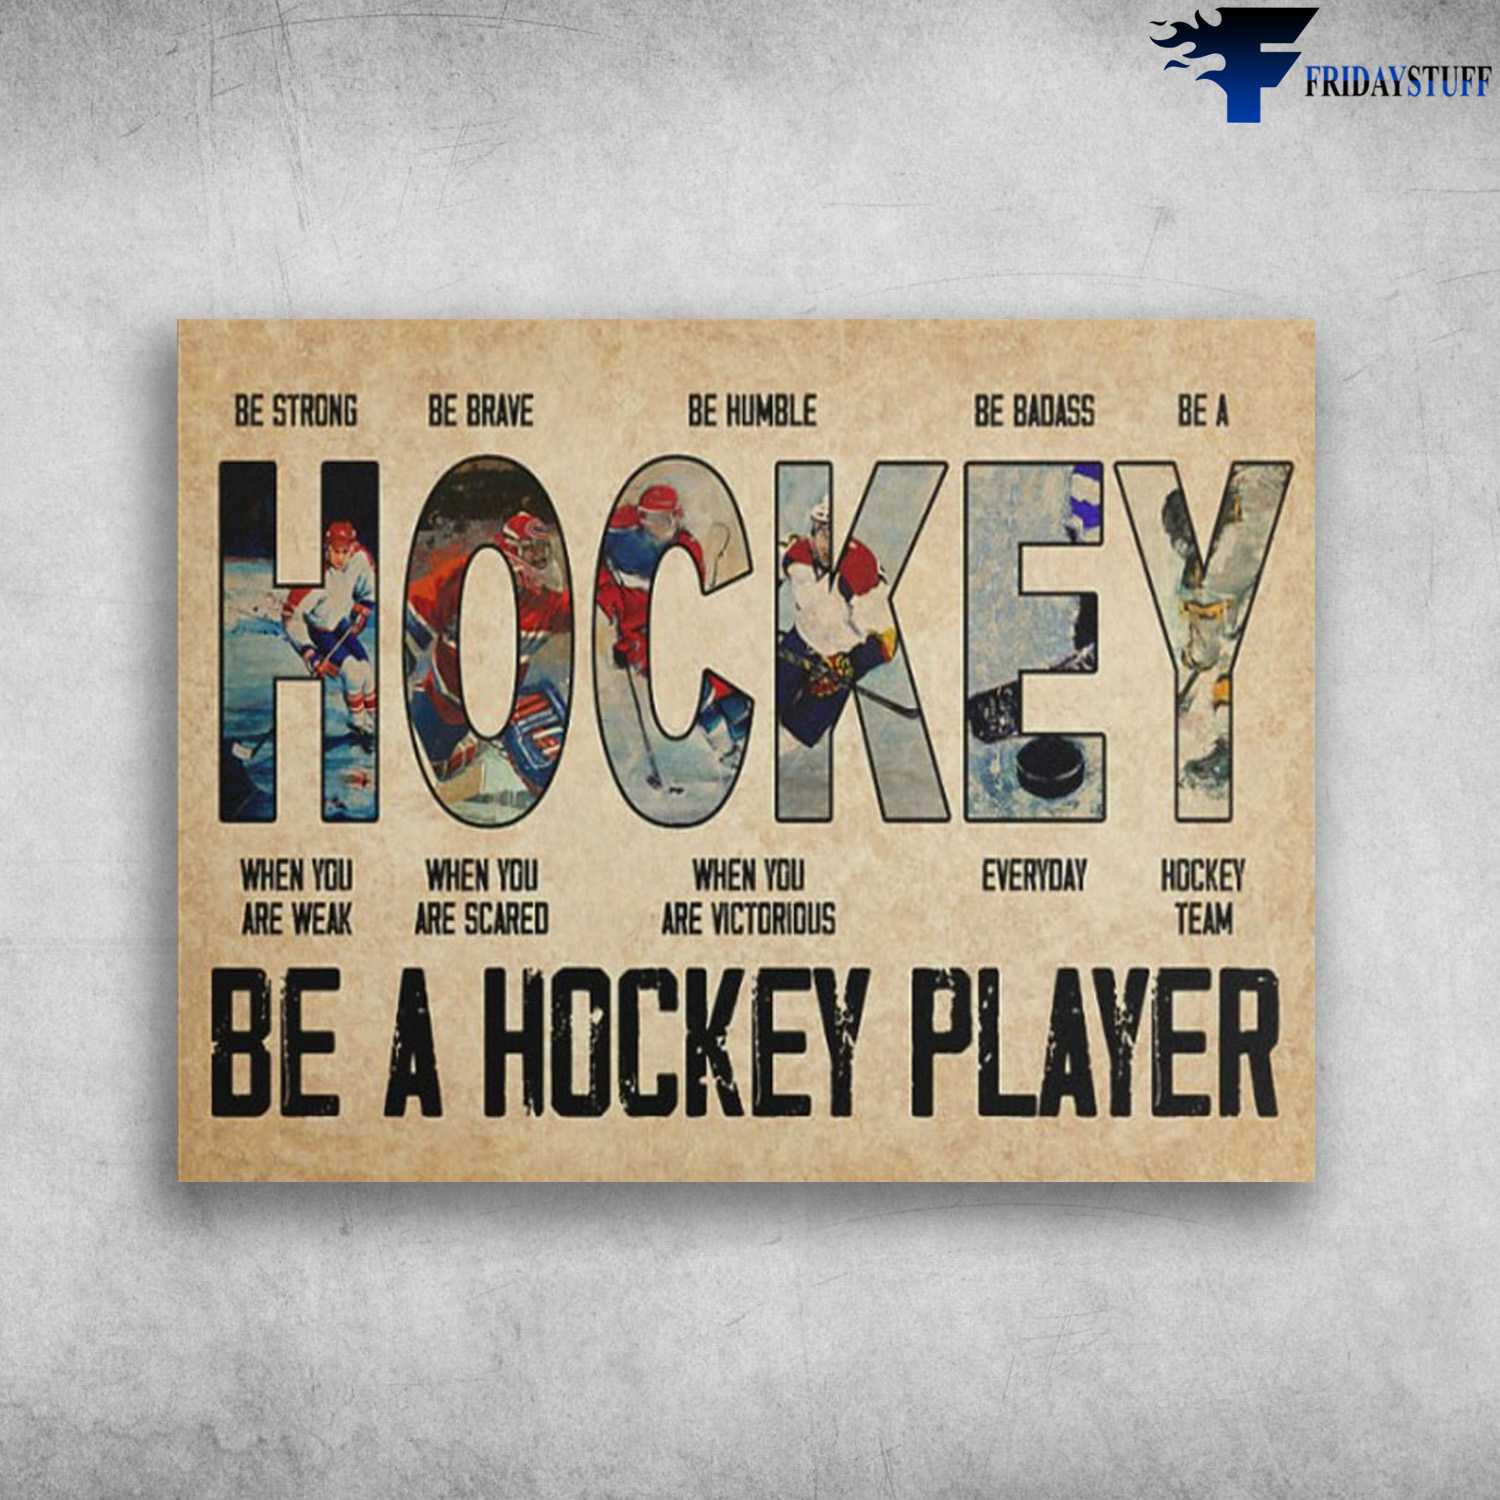 Hockey Poster, Be Strong When You Are Weak, Be Brave When You Are Scared, Be Humble When You Are Victorious, Be Badass Everyday, Be A Hockey Team, Be A Hockey Player